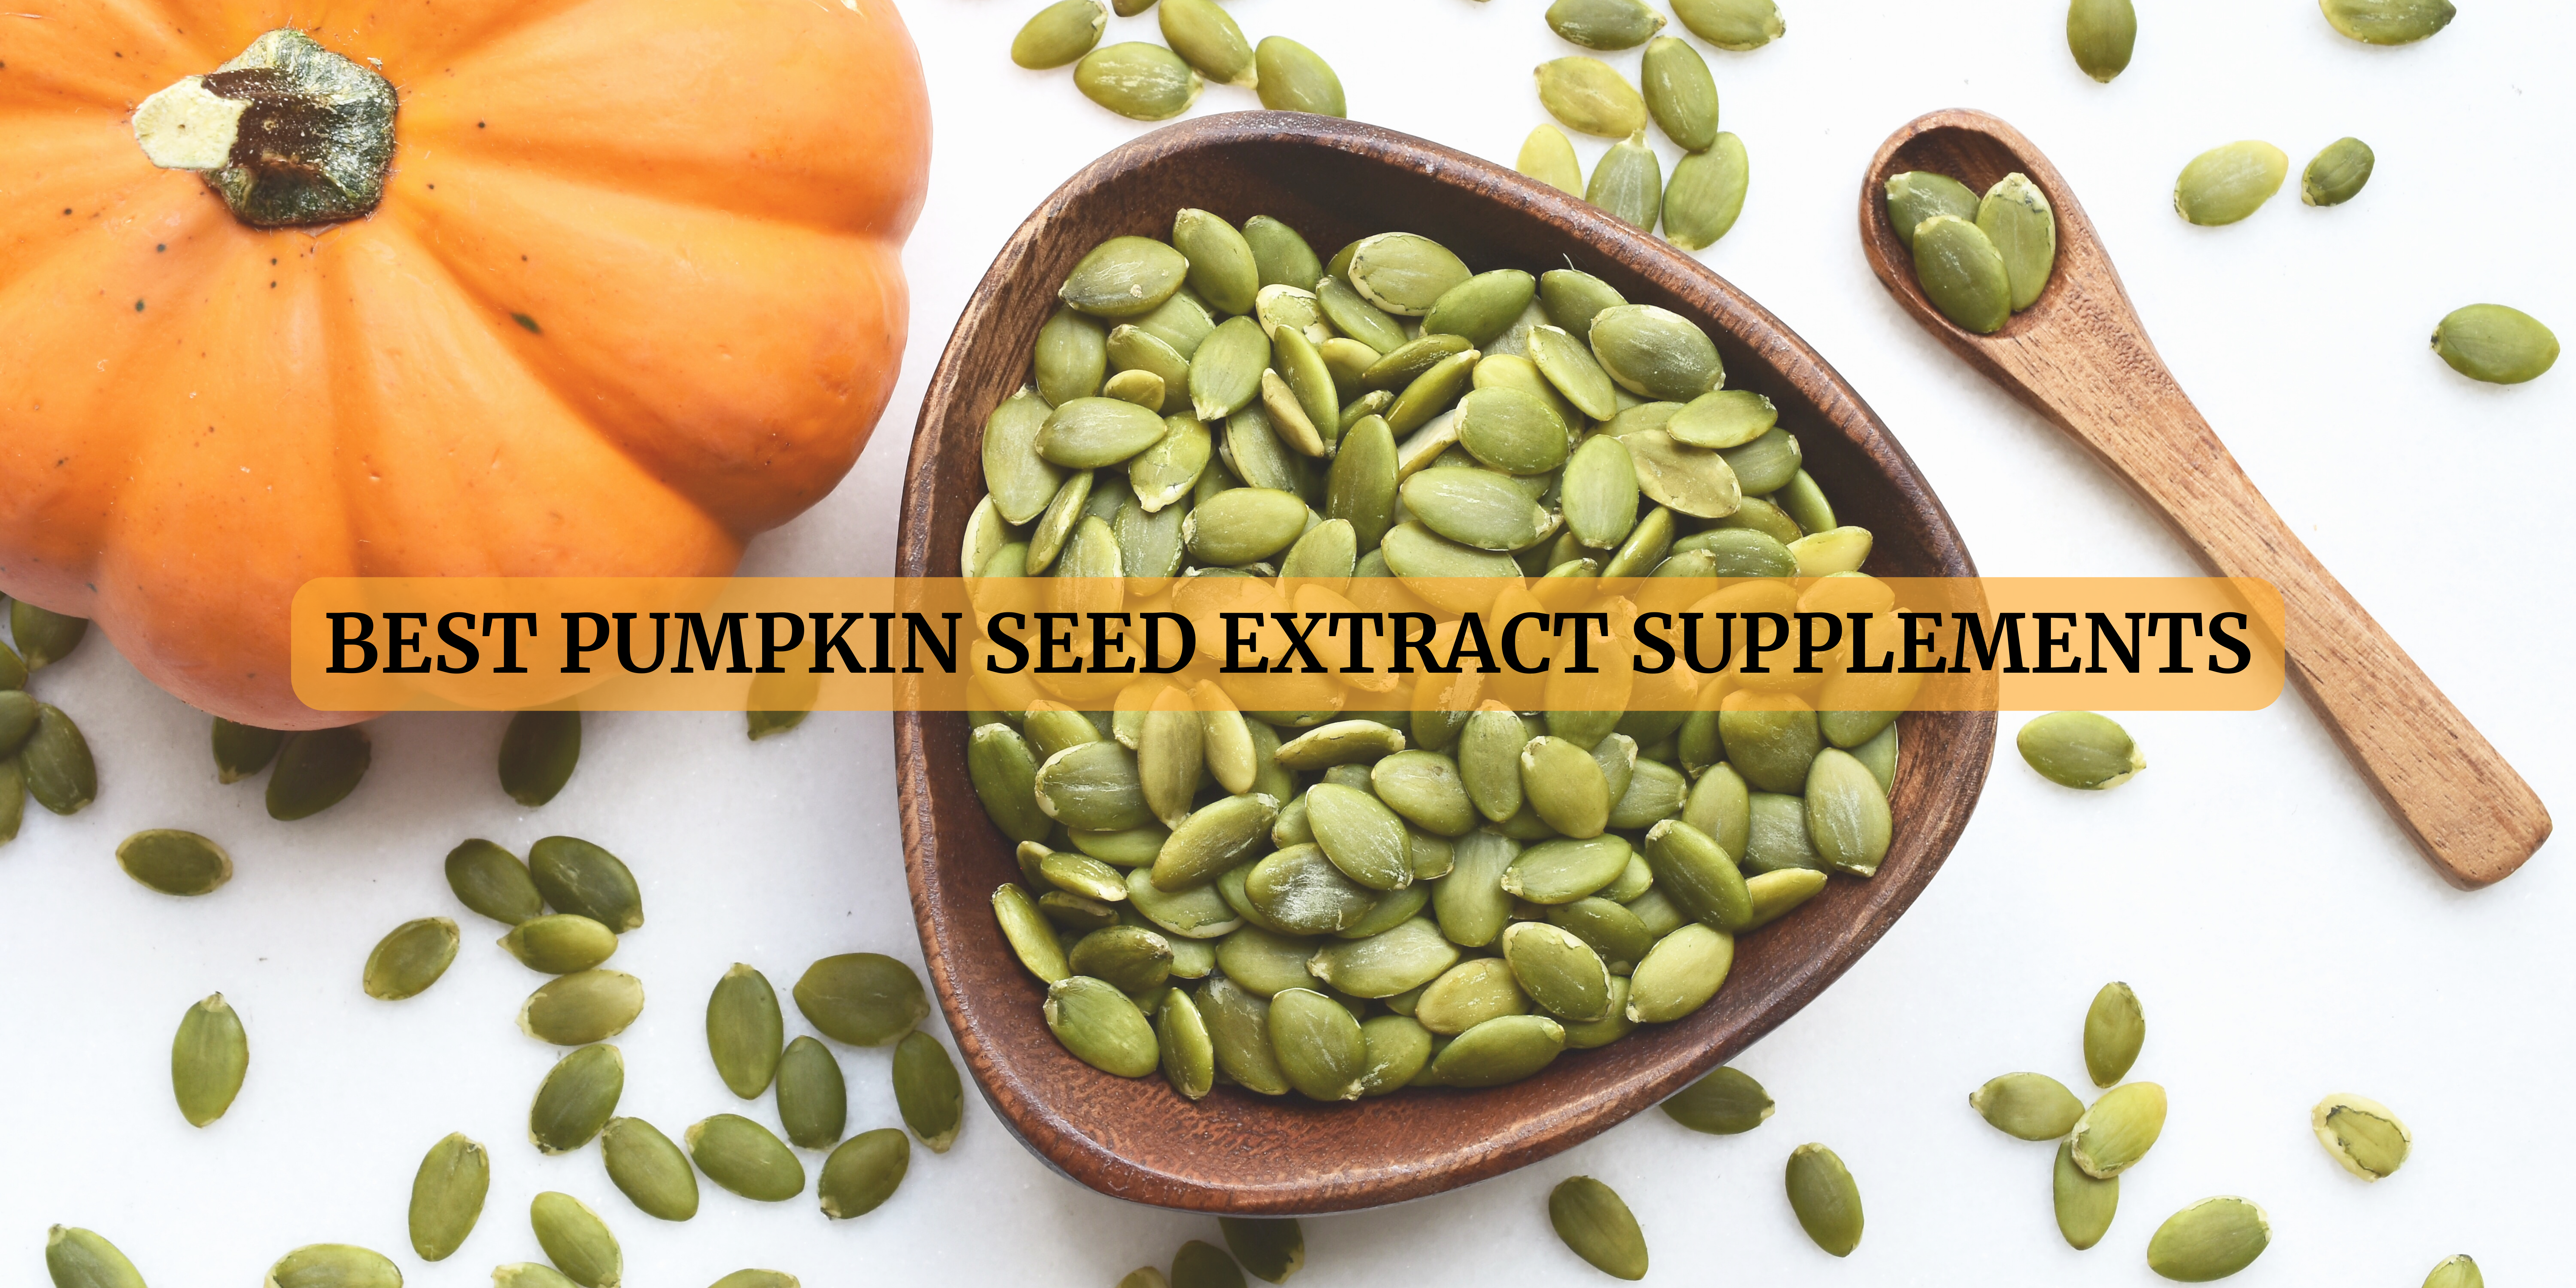 pumpkin seed extract supplements in USA